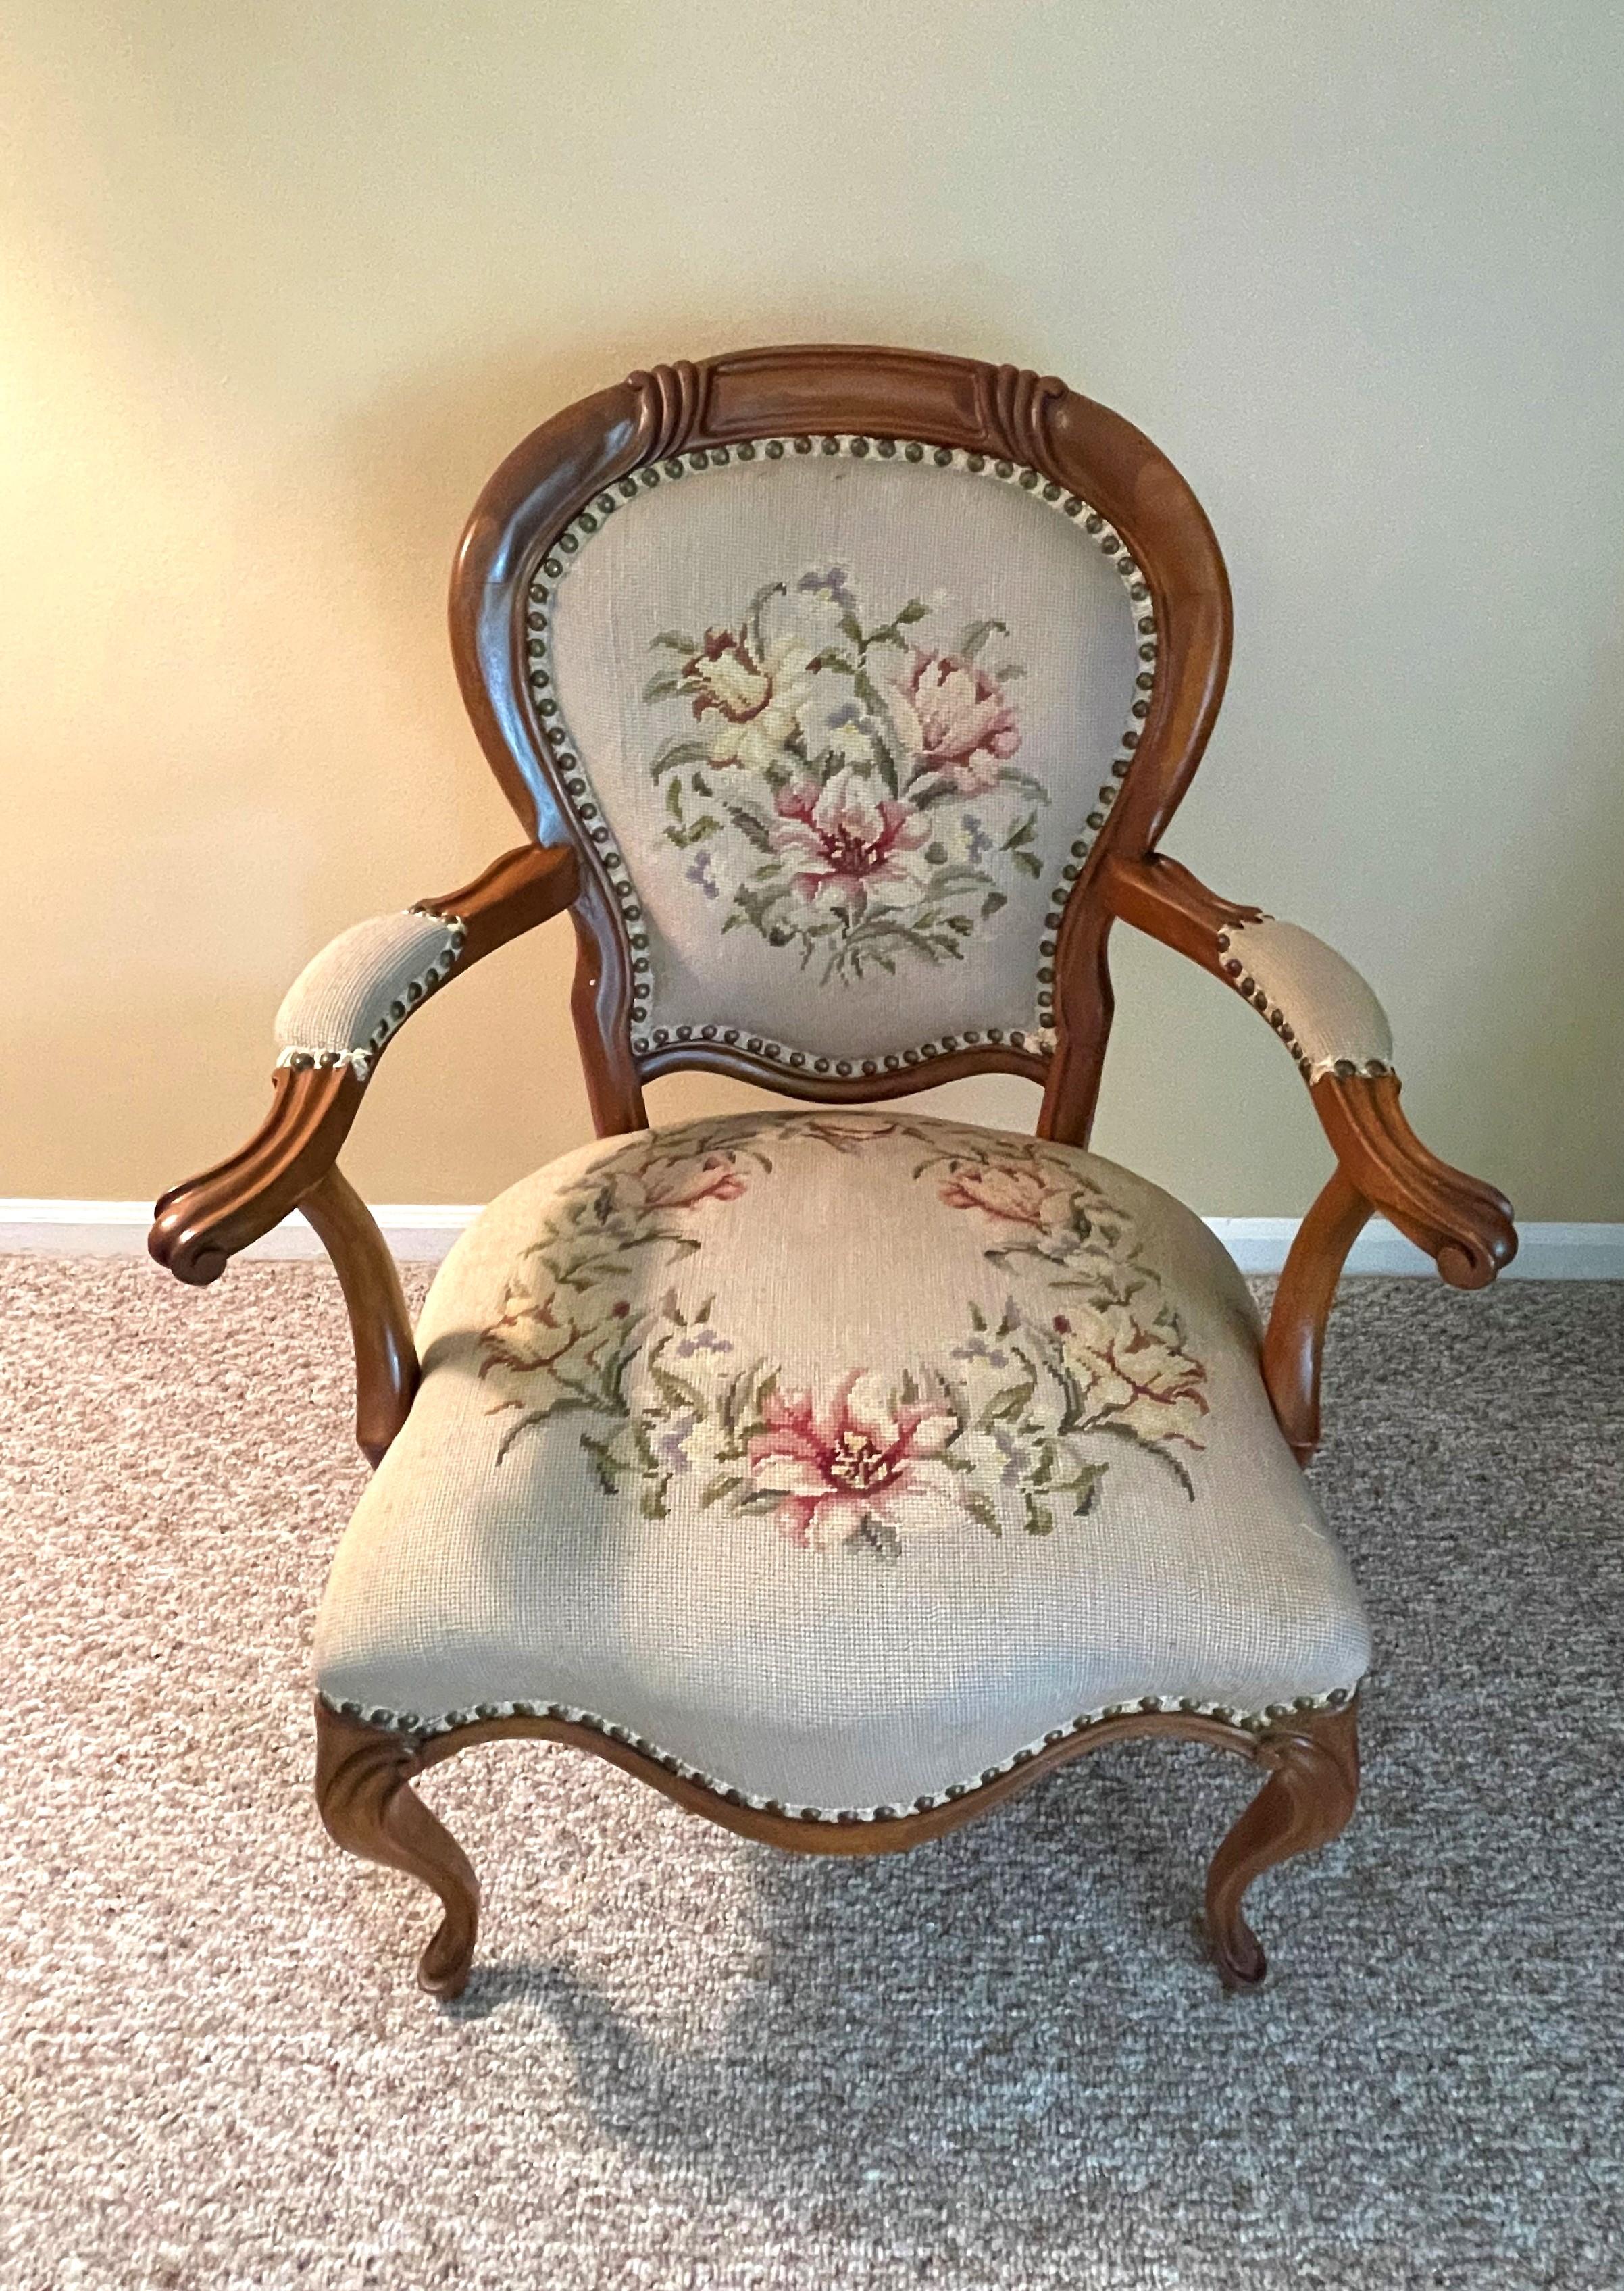 1920s French Walnut Accent Chair with Needlepoint Upholstery In Good Condition For Sale In Austin, TX